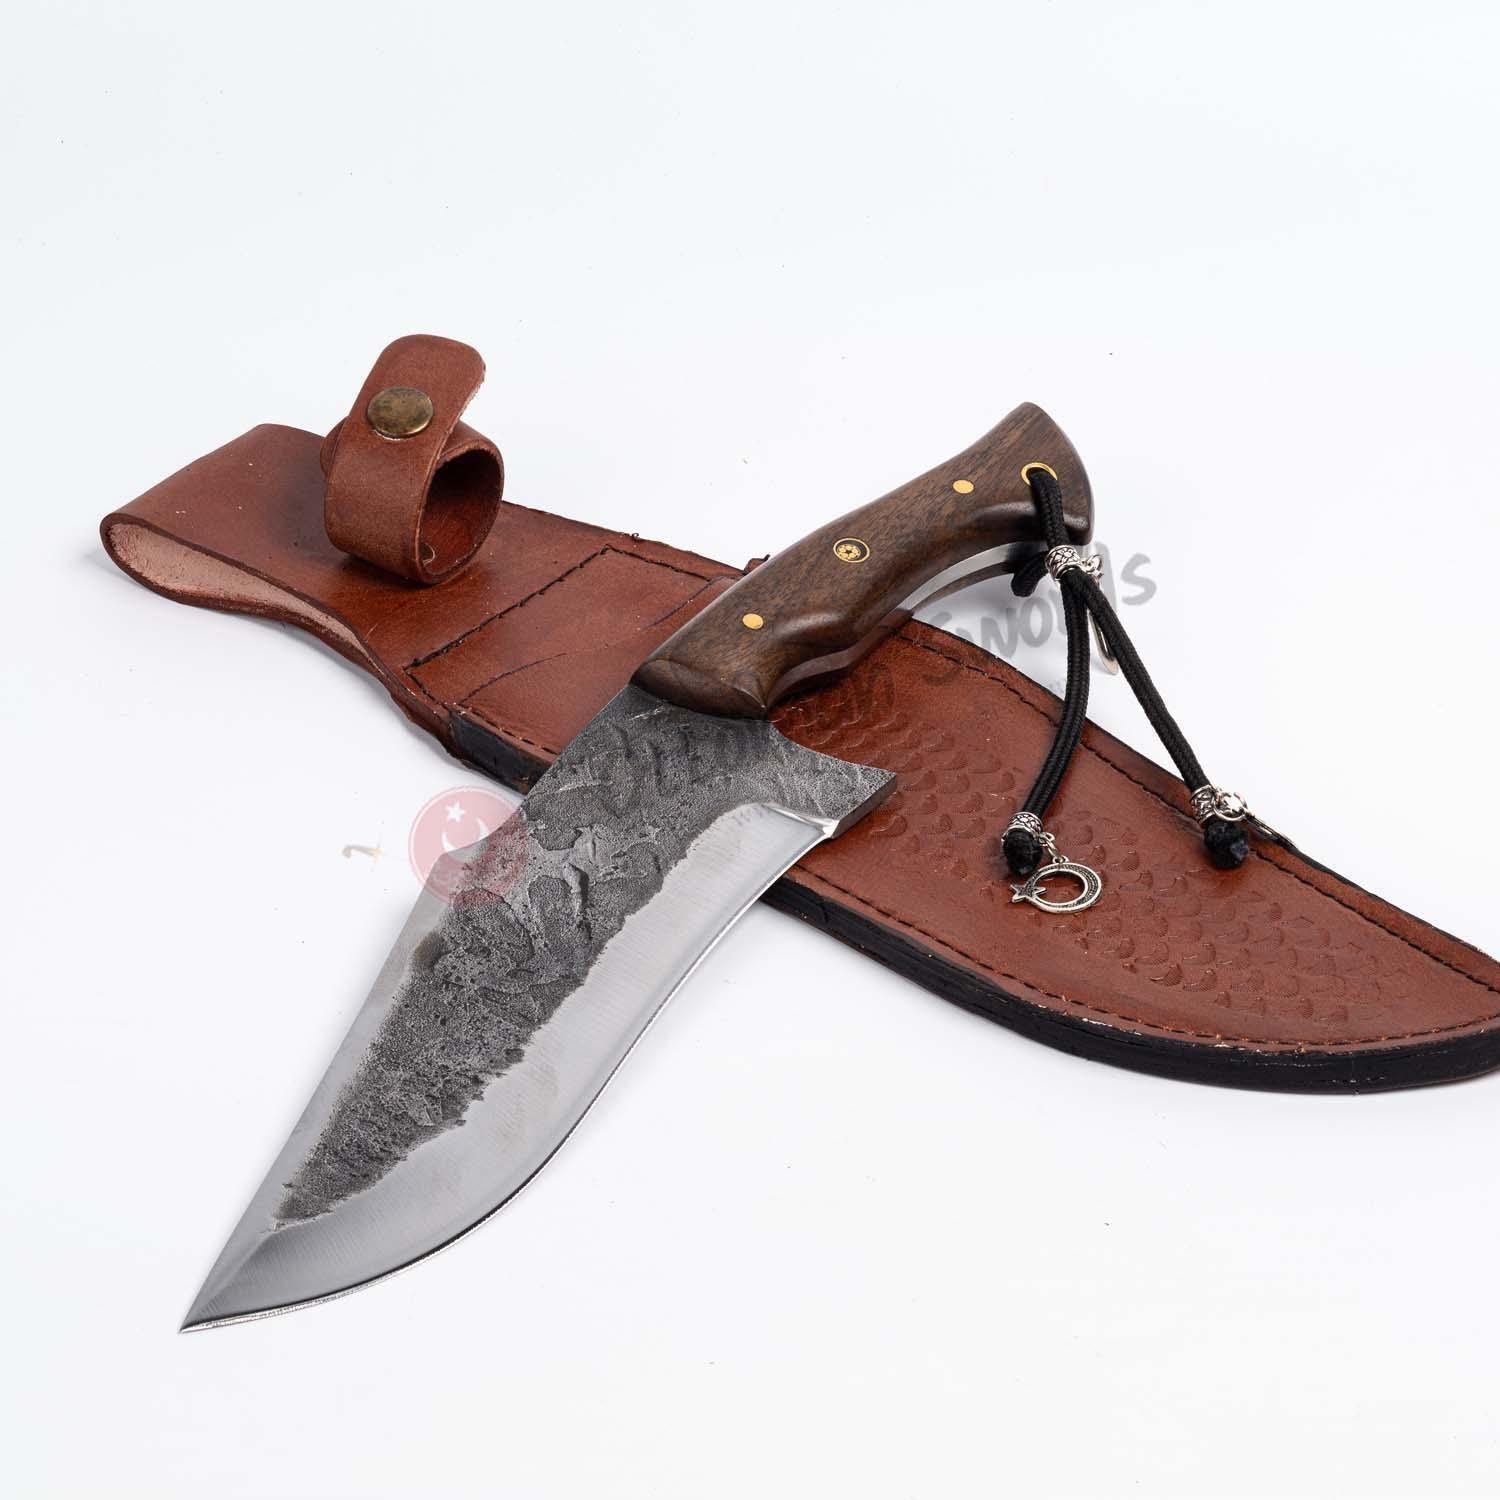 Best Hand Forged Hunting Knives For Sale (7)